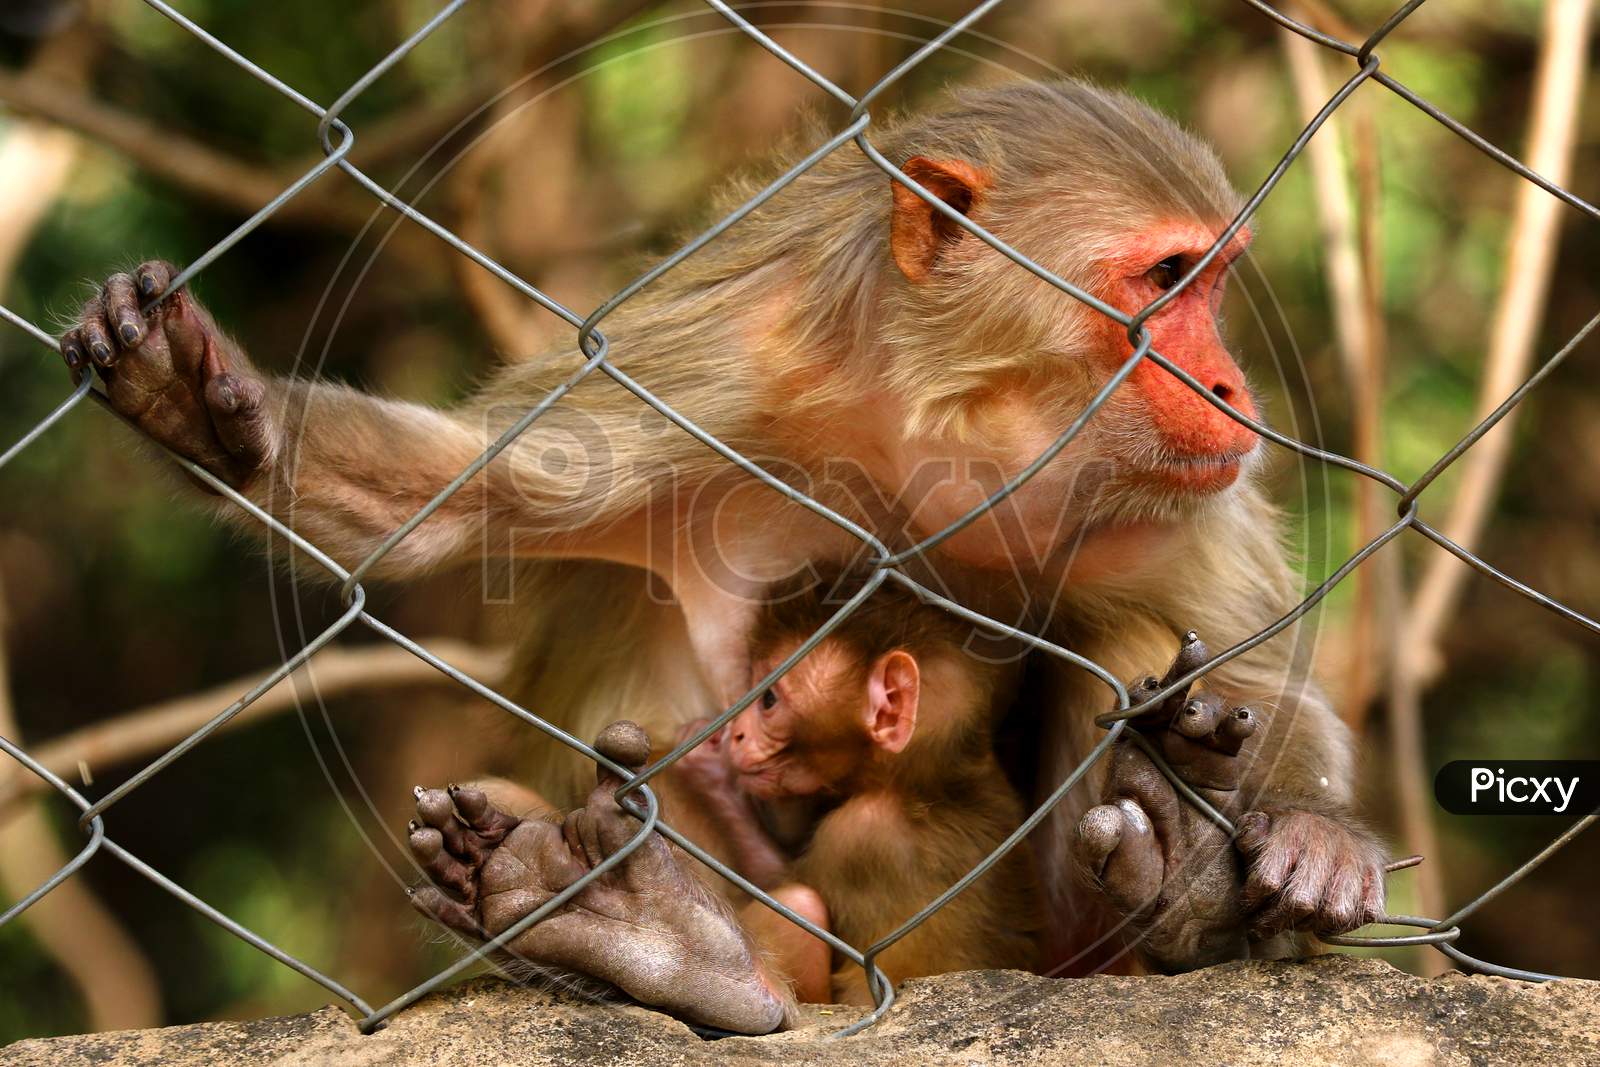  A female macaque and her baby on the eve of Mother's Day in Pushkar, Rajasthan, India on 09 May 2020.